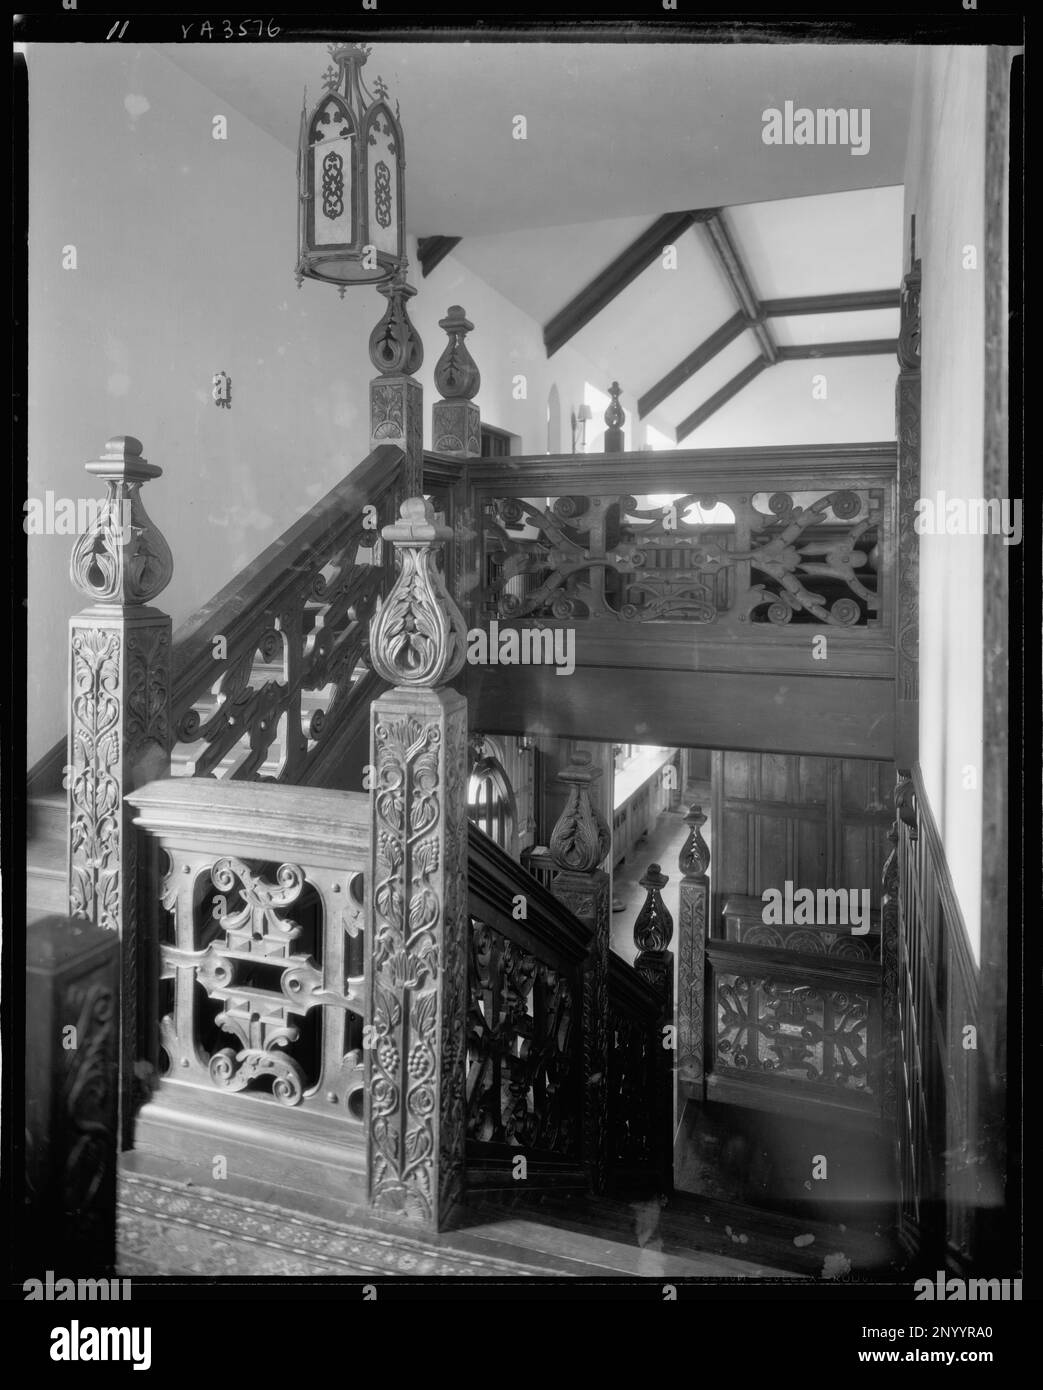 Agecroft Hall, Richmond, Henrico County, Virginia. Carnegie Survey of the Architecture of the South. United States  Virginia  Henrico County  Richmond, Hand railings, Woodwork, Stairways, Interiors. Stock Photo